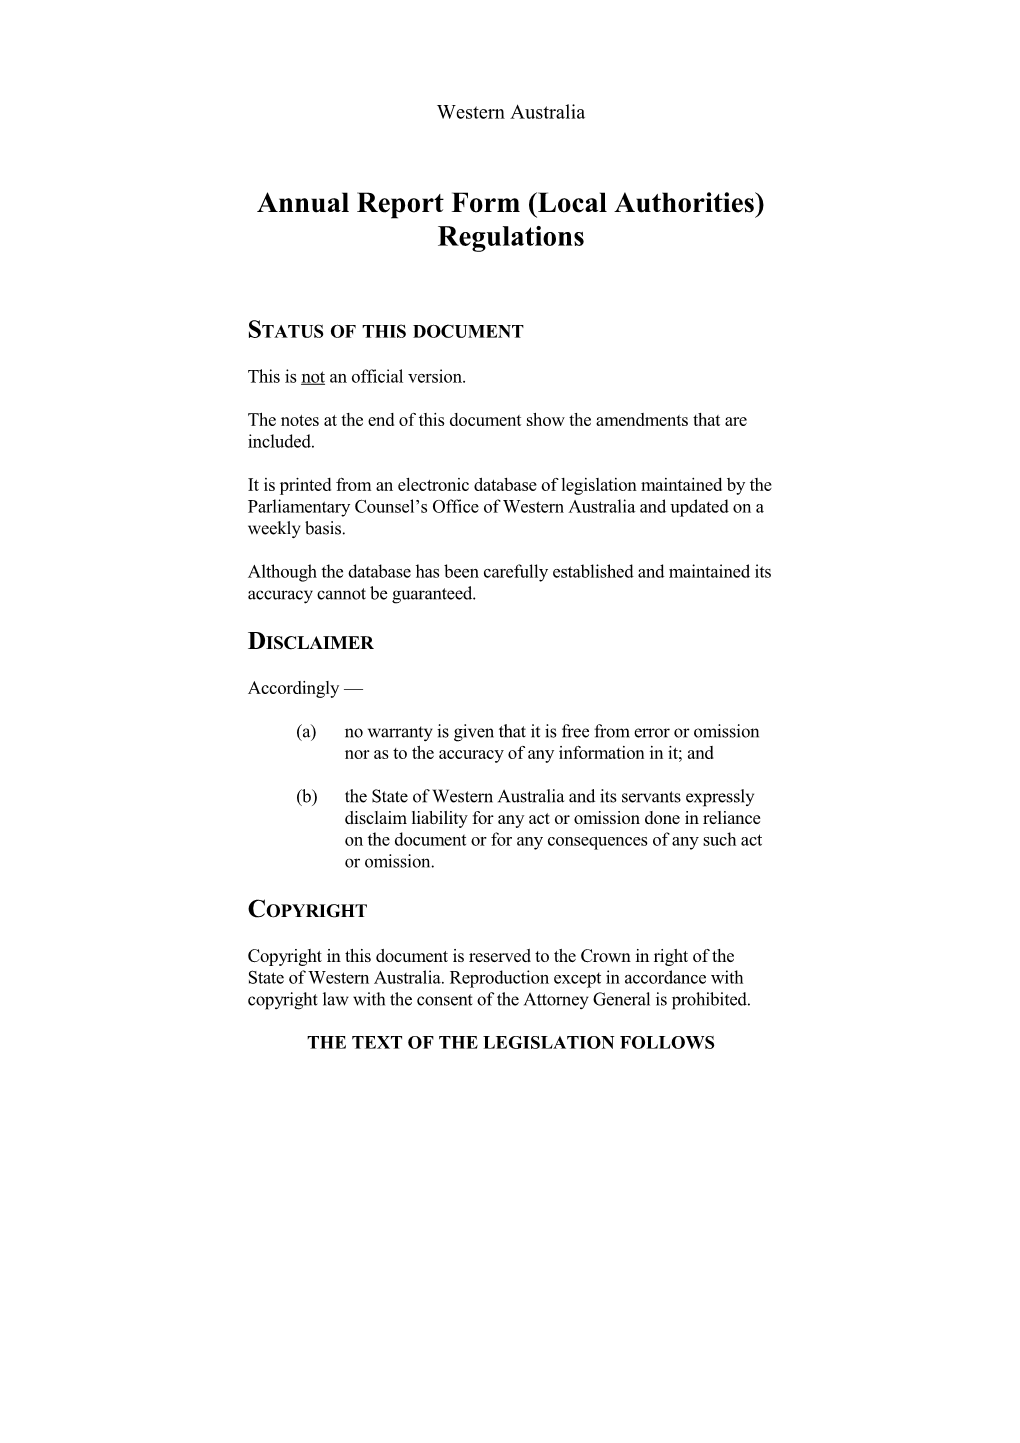 Annual Report Form (Local Authorities) Regulations